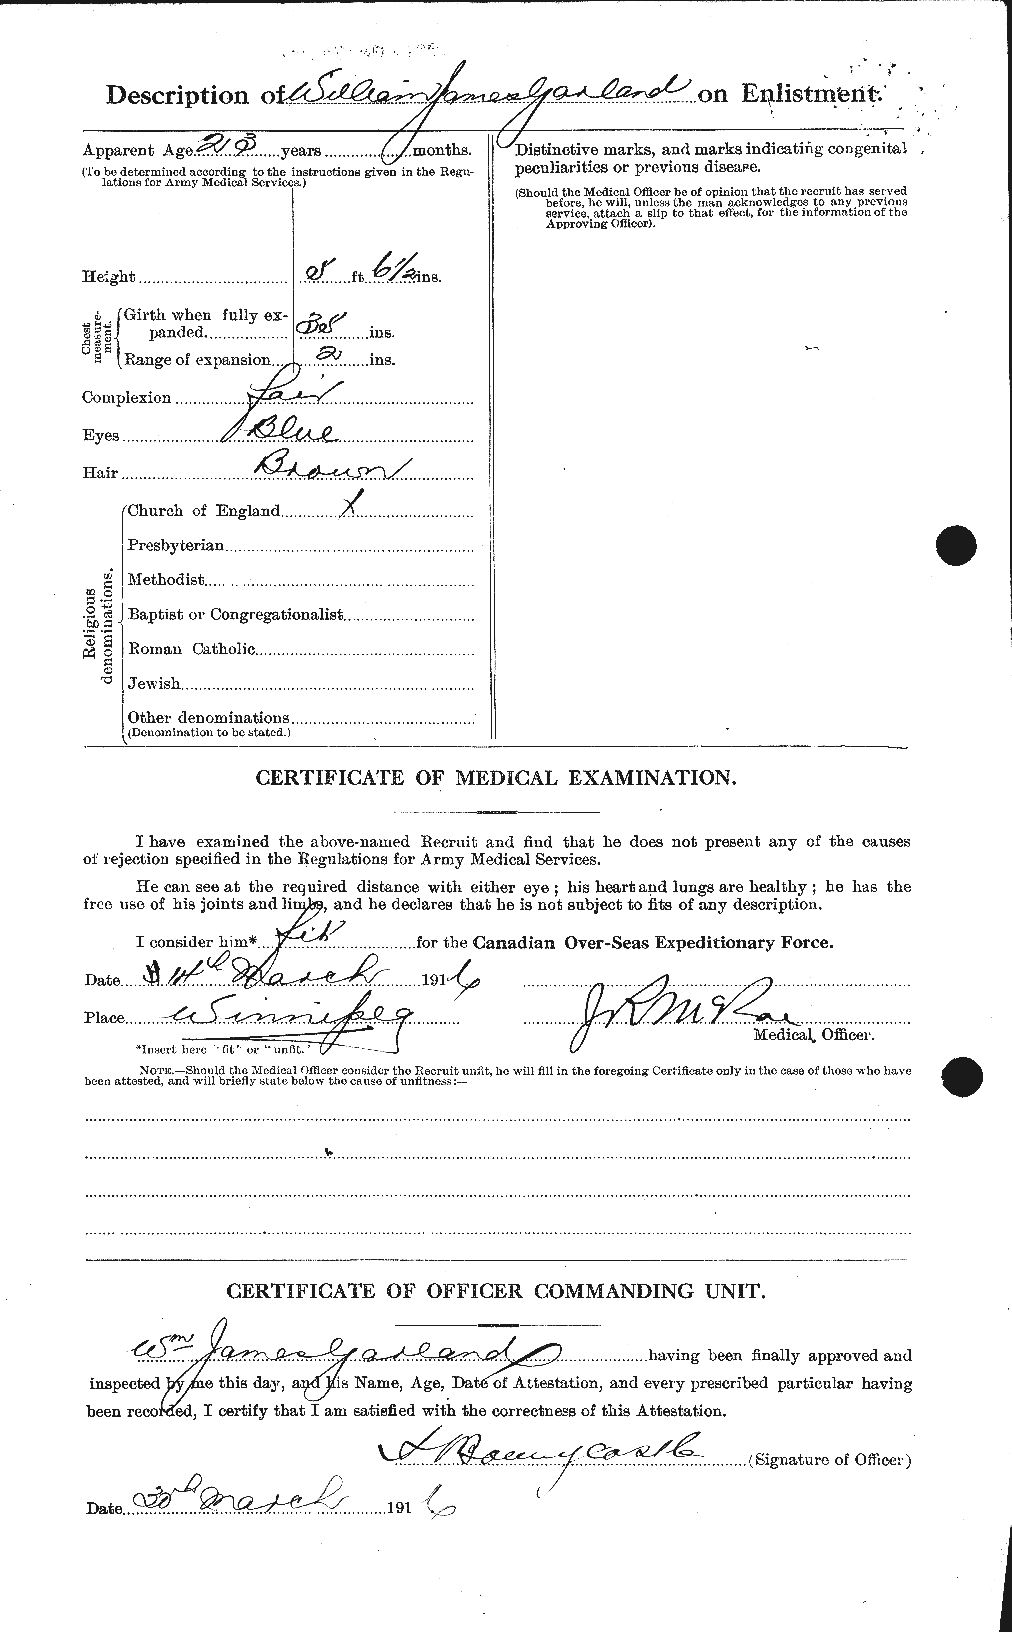 Personnel Records of the First World War - CEF 343995b